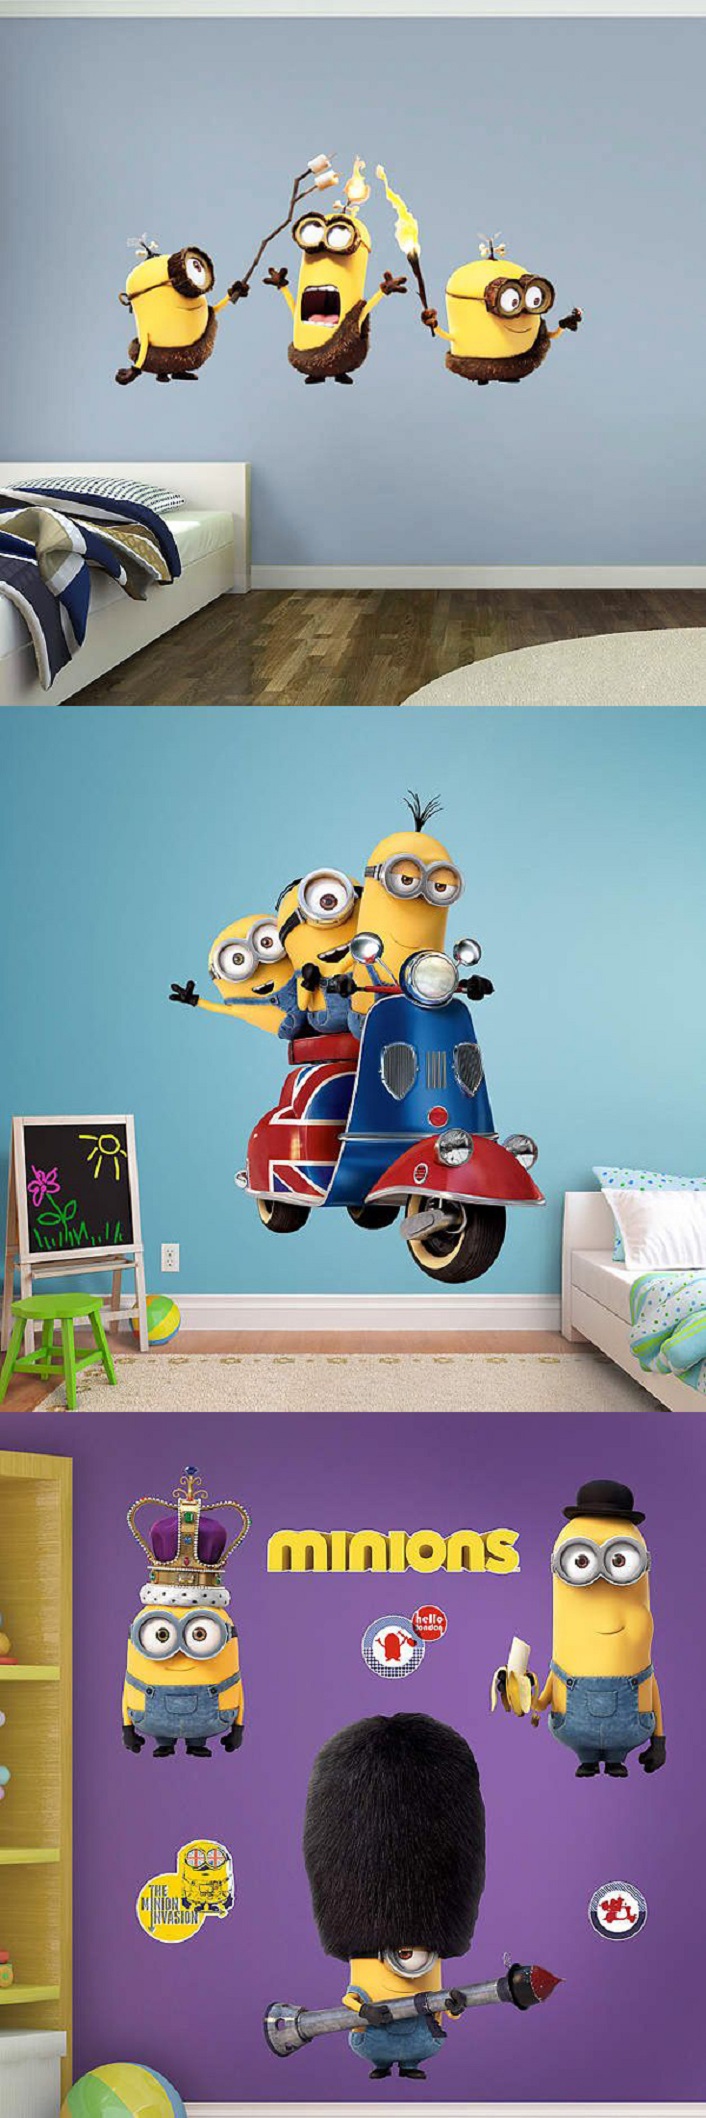 AD-Awesome-Ideas-To-Decorate-Your-Home-With-Minions-14